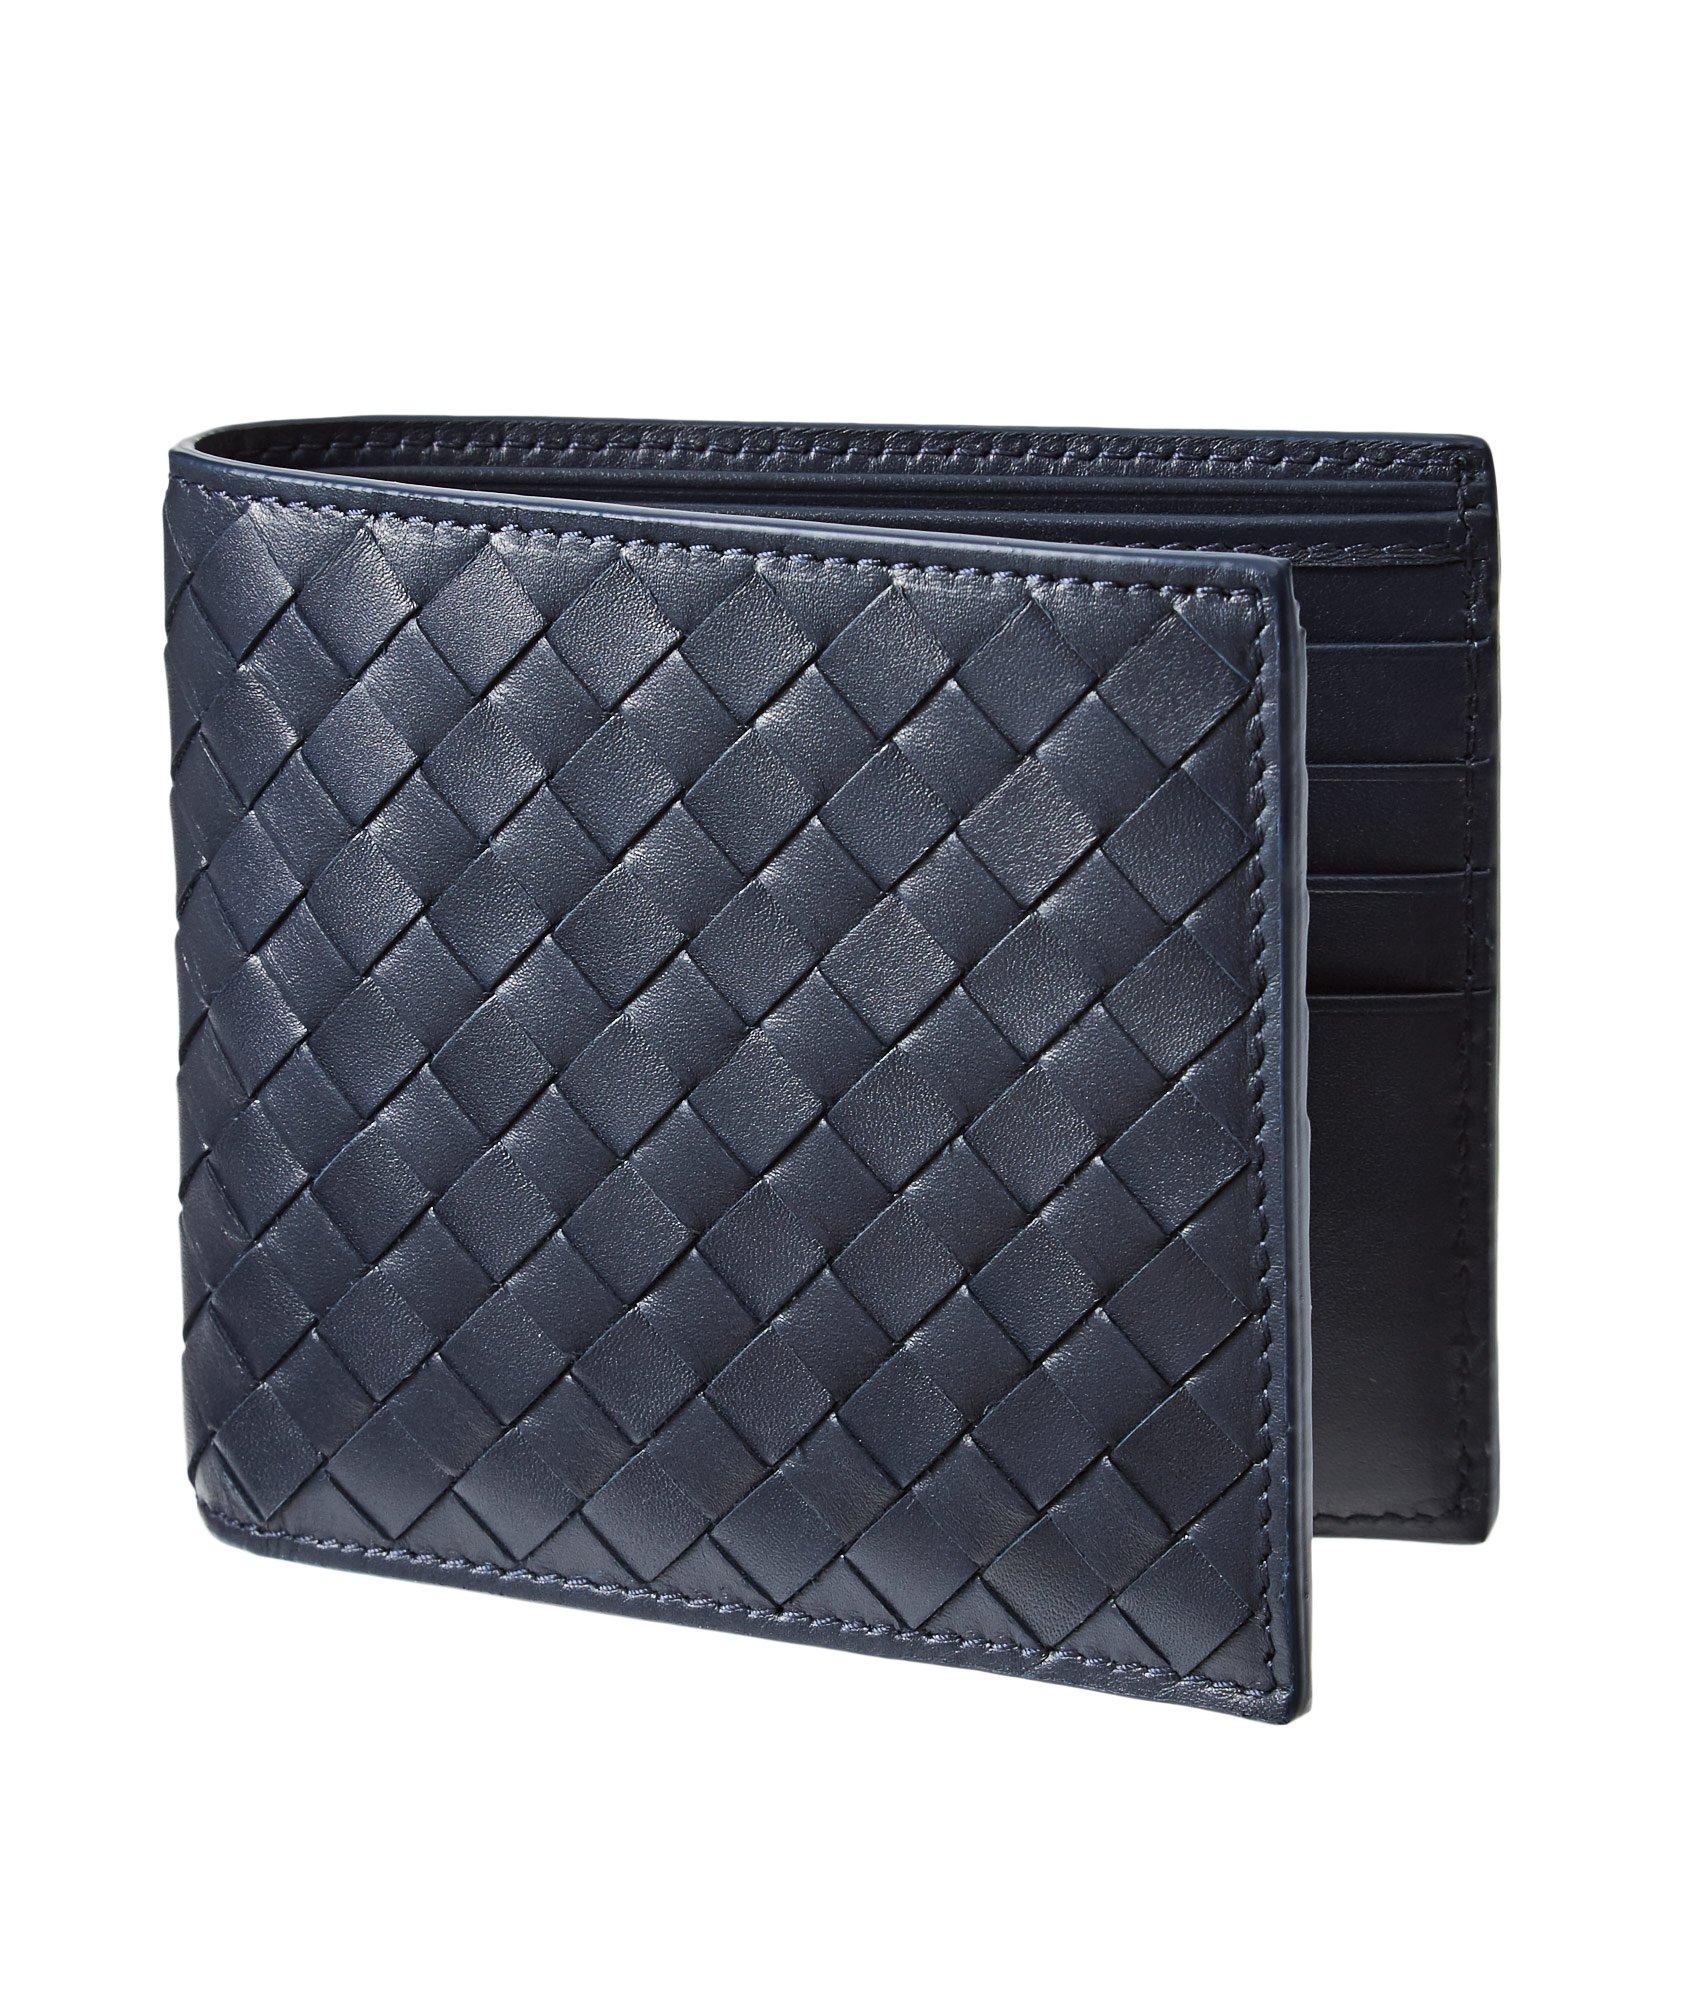 Woven Leather Bifold Wallet image 0